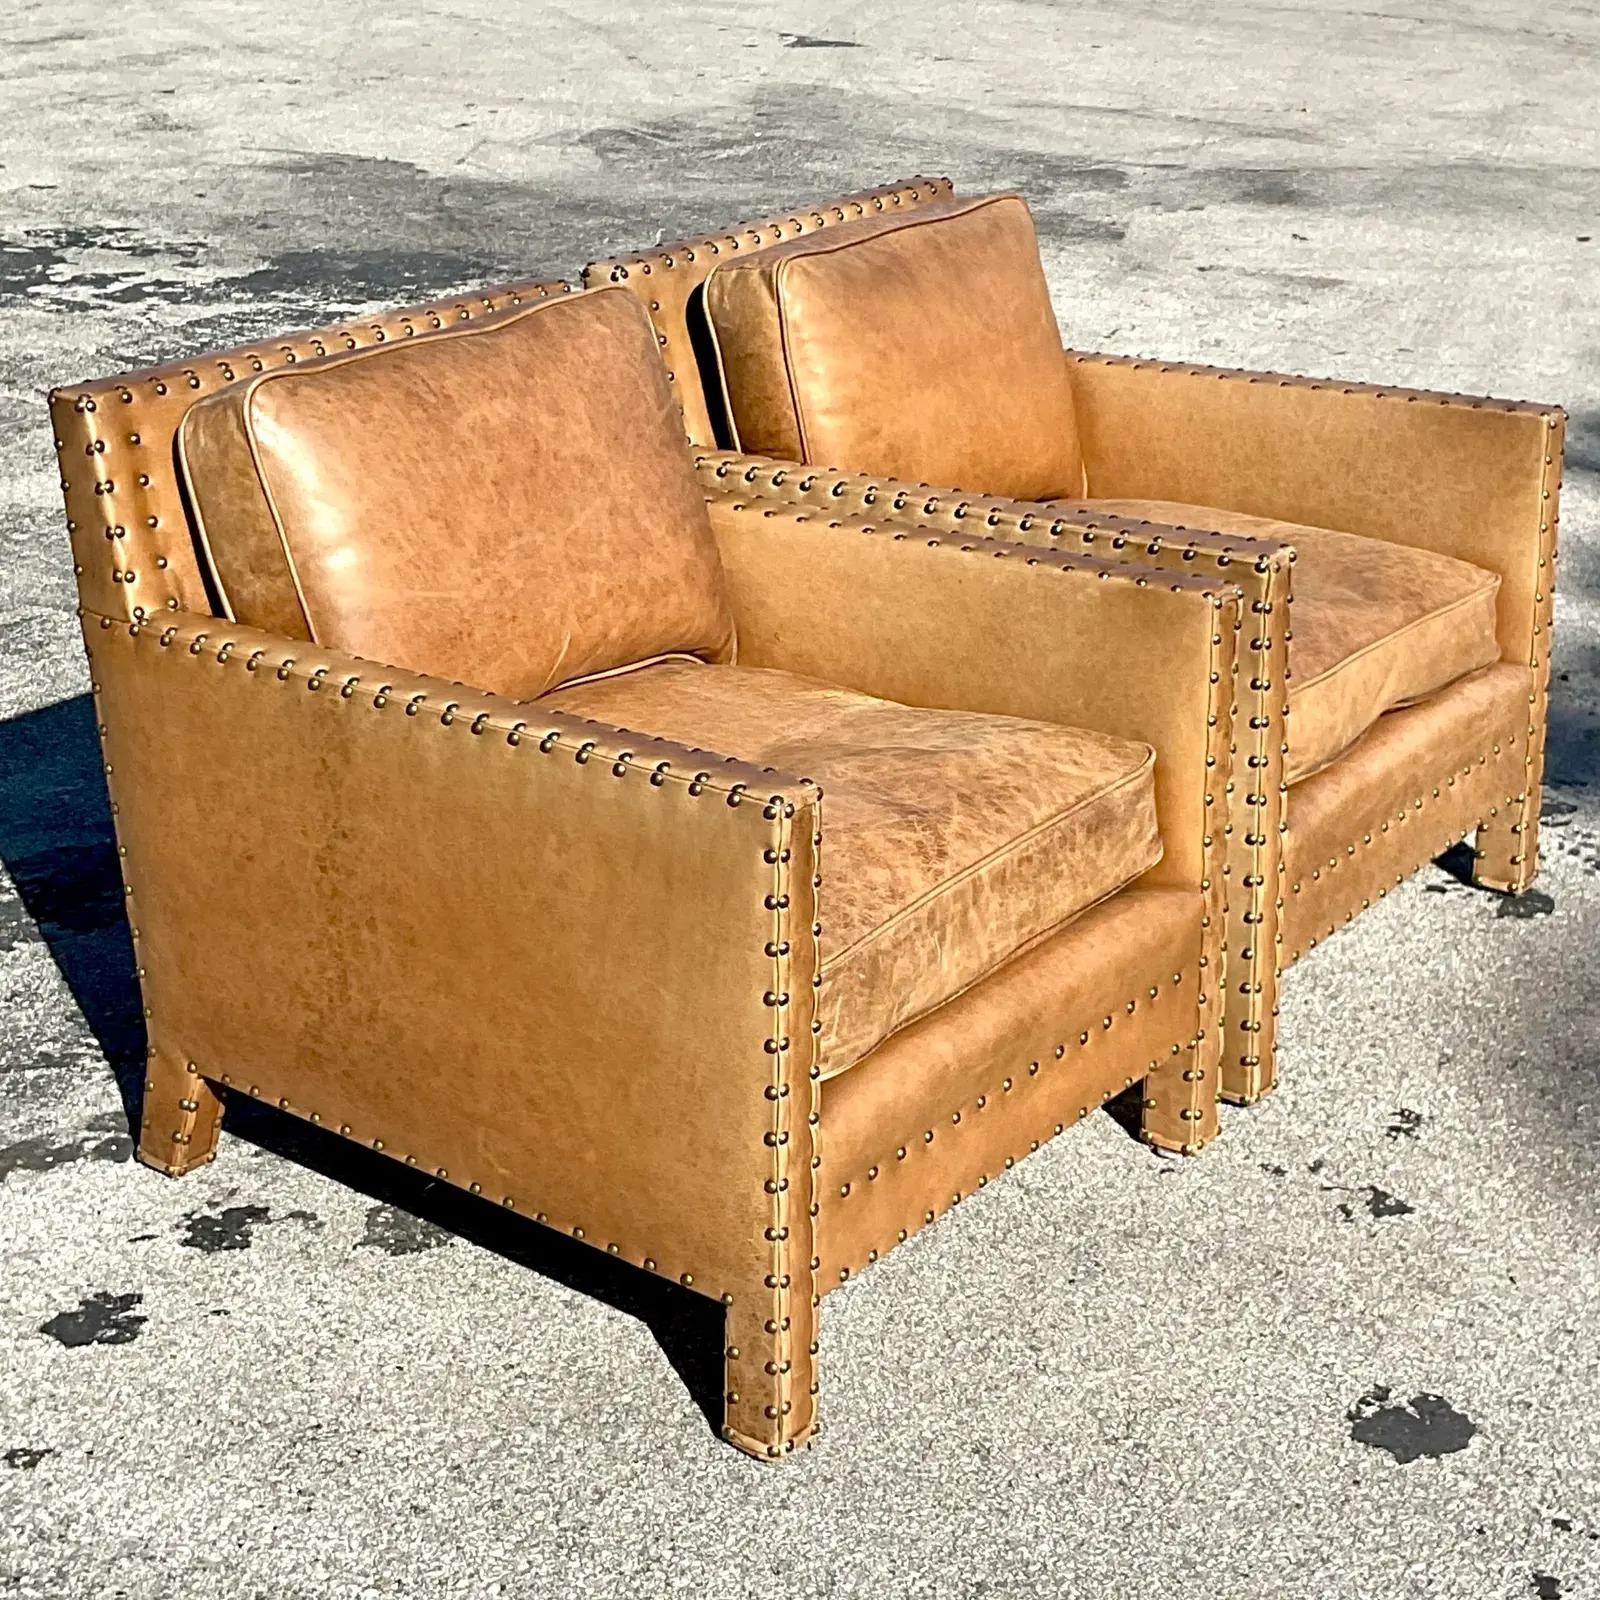 An exceptional pair of vintage Boho leather lounge chairs. Made by the iconic Ralph Lauren. Beautiful distressed leather with chic nailhead trim. Signed. Acquired from a Palm Beach estate.